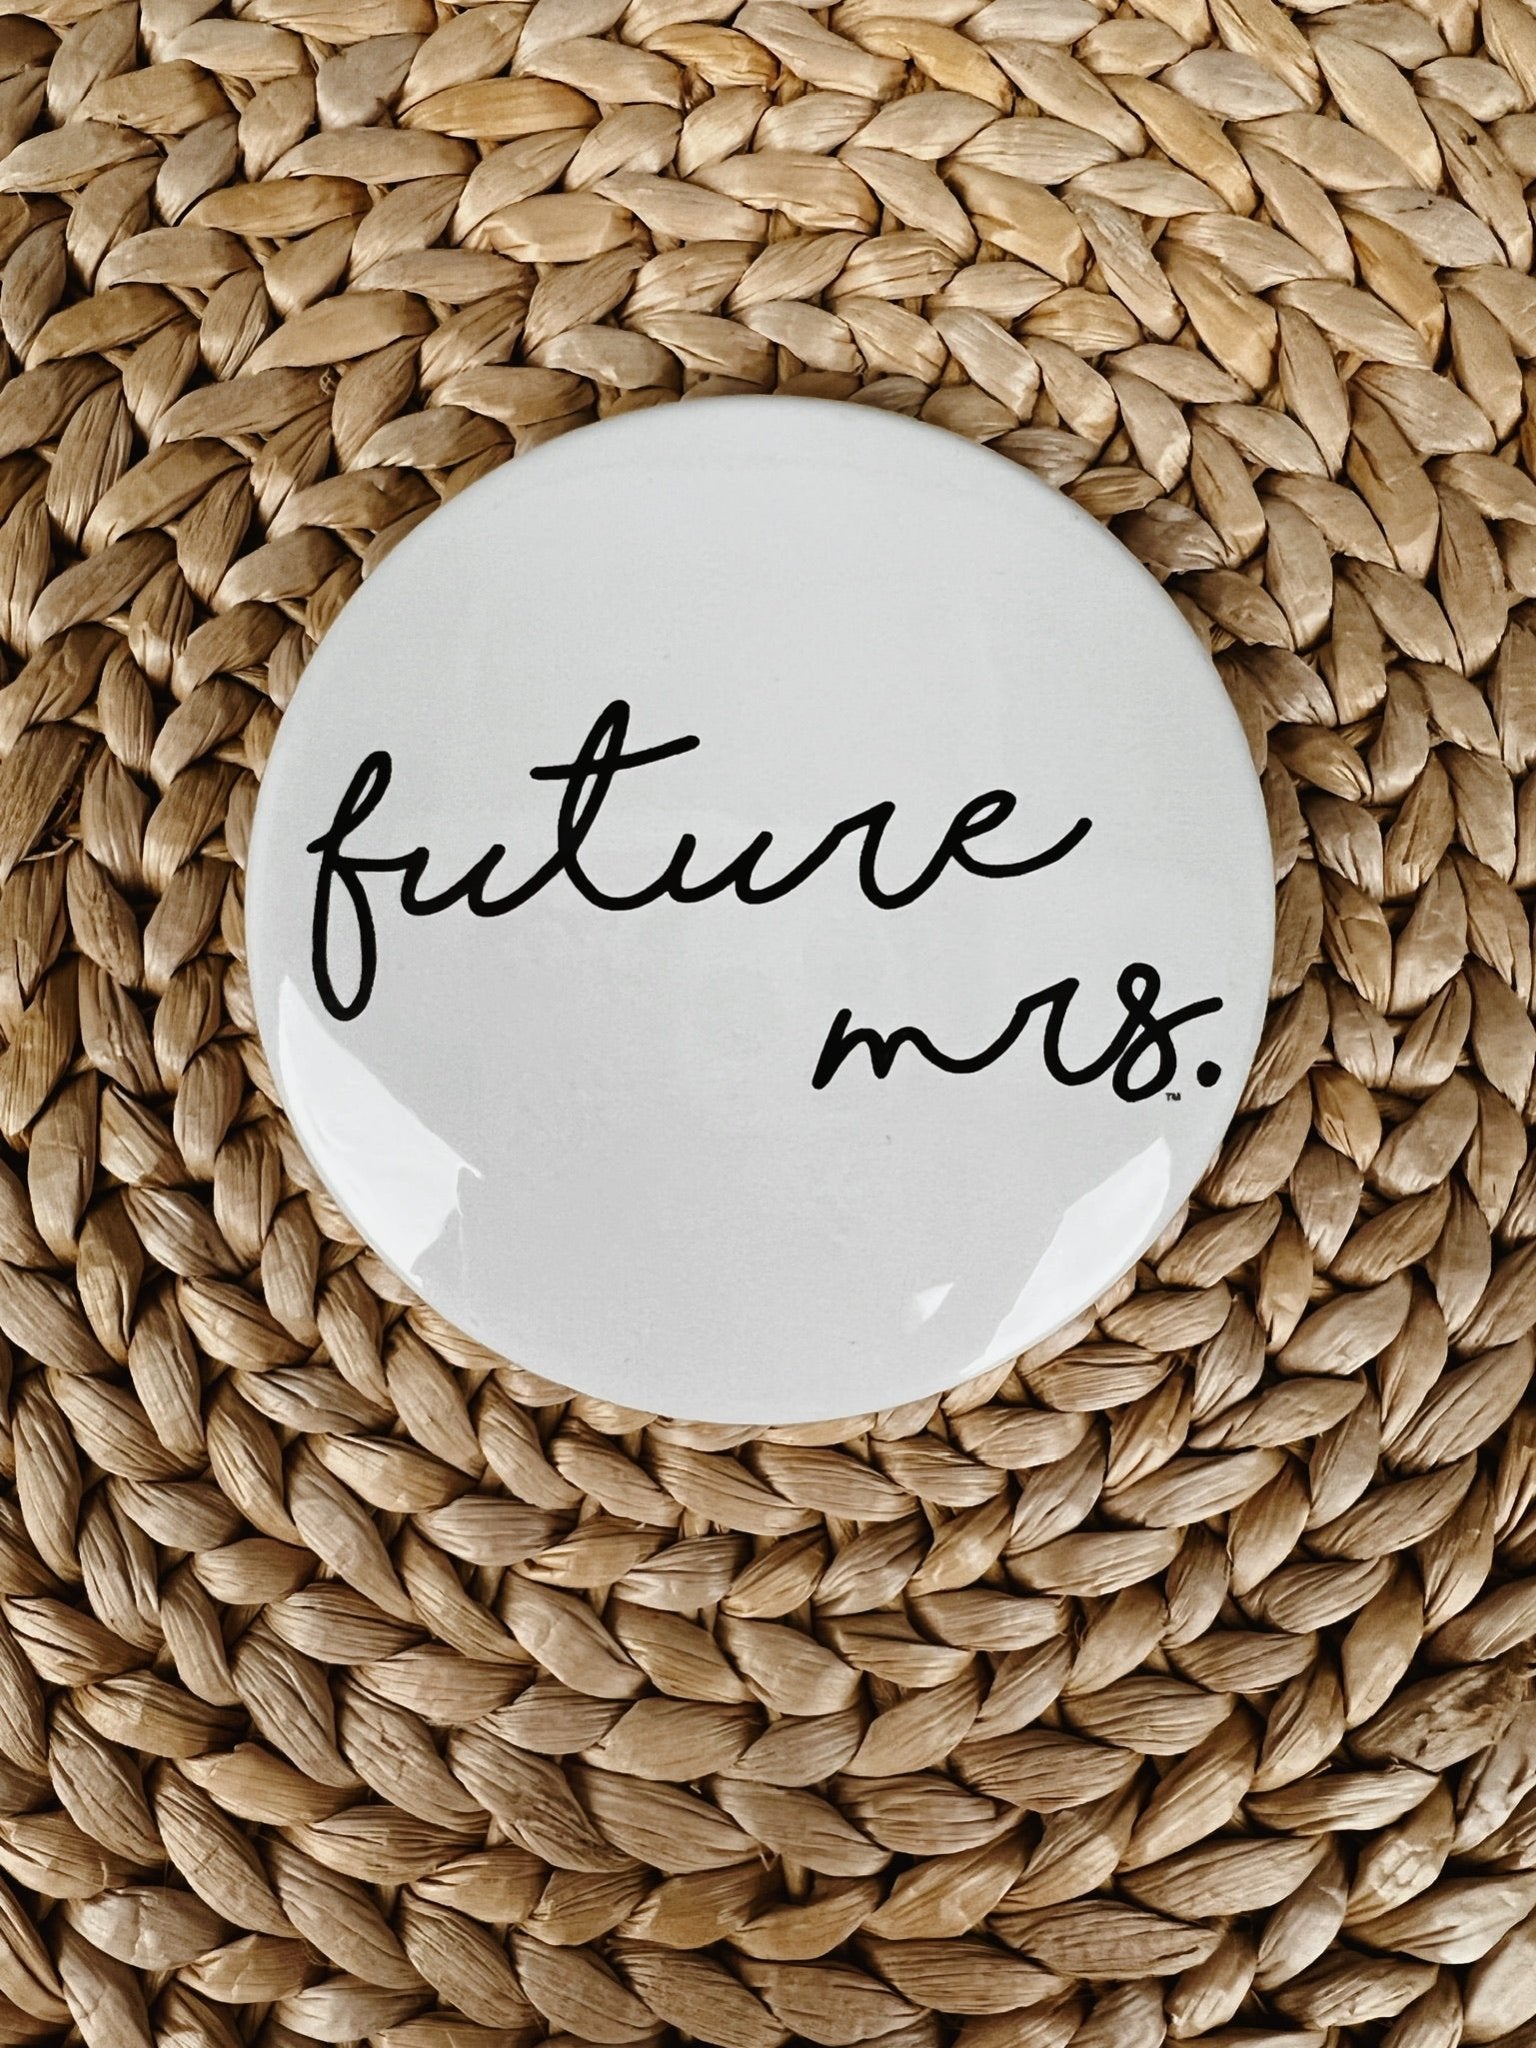 Future Mrs button - Stylish button -  Cute Bridal Collection at Lush Fashion Lounge Boutique in Oklahoma City